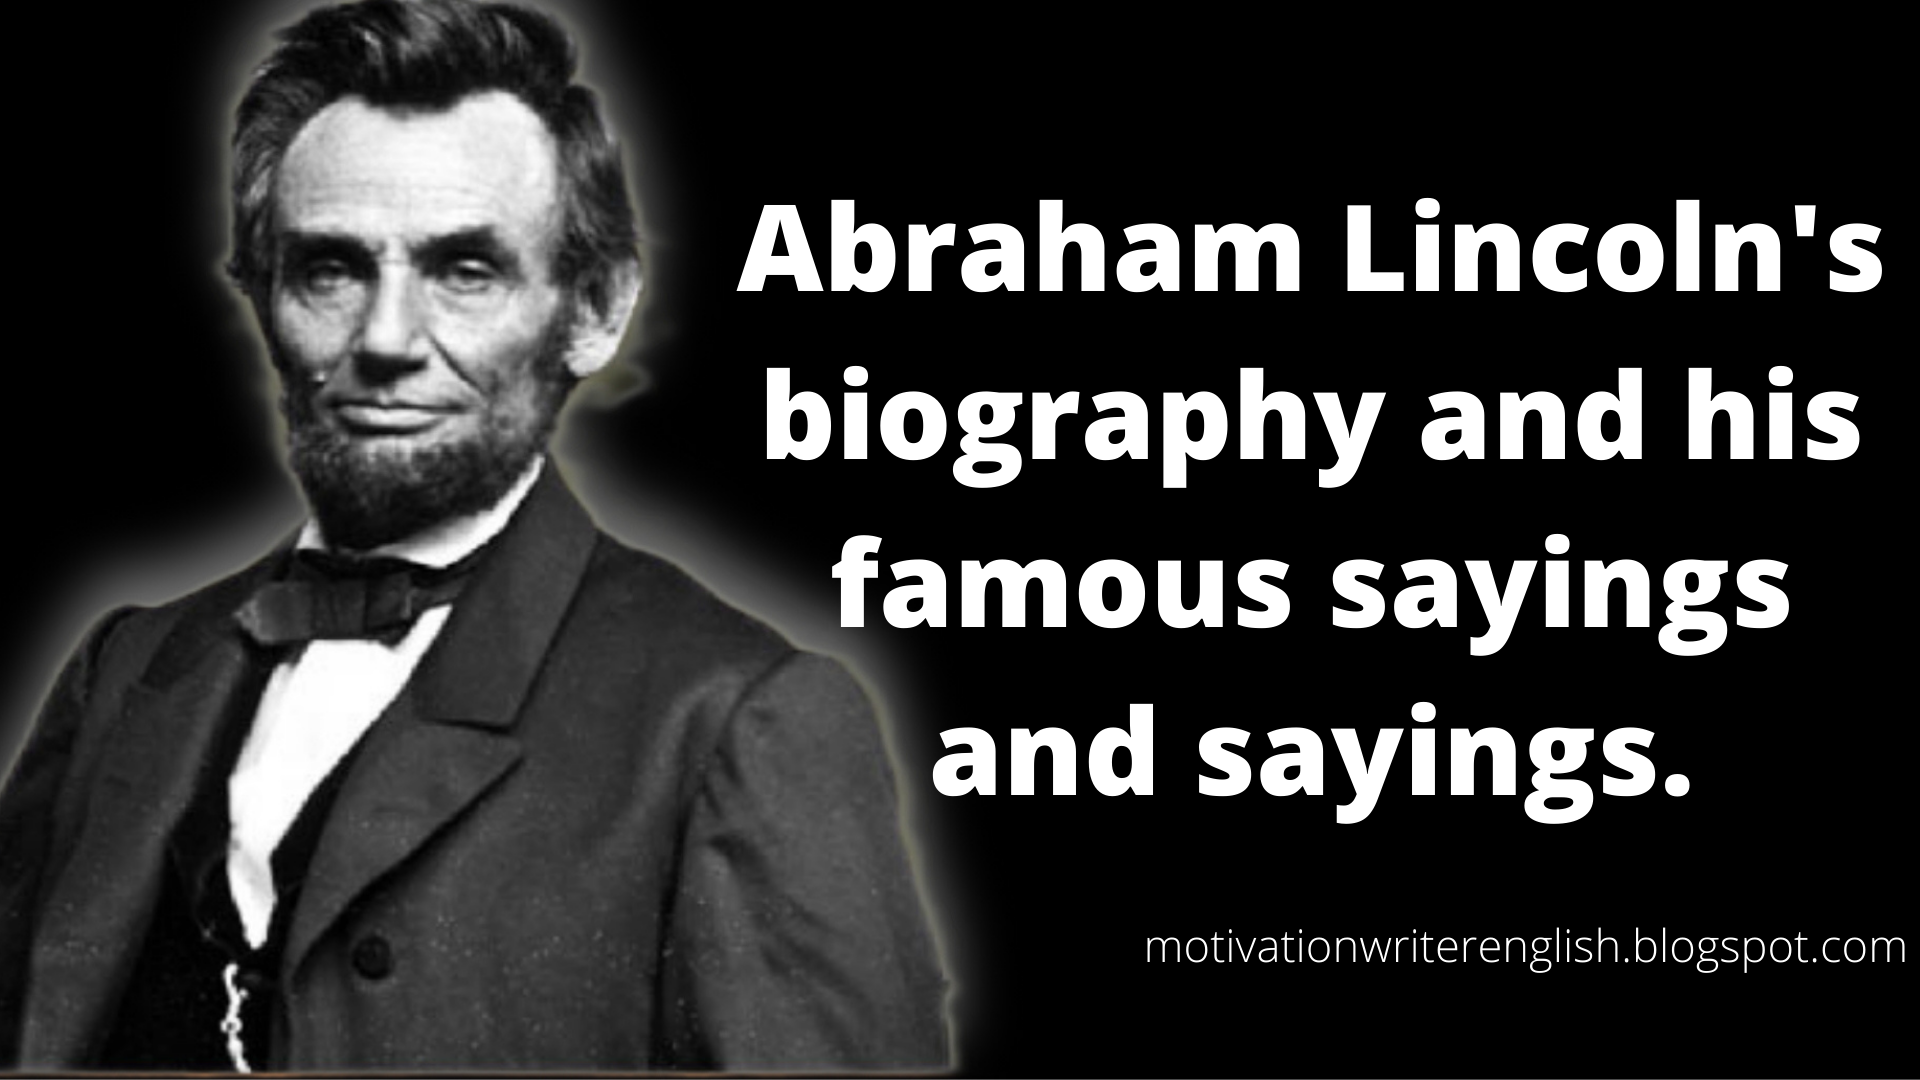 Abraham Lincoln's biography and his famous sayings and sayings-motivationwriterenglish